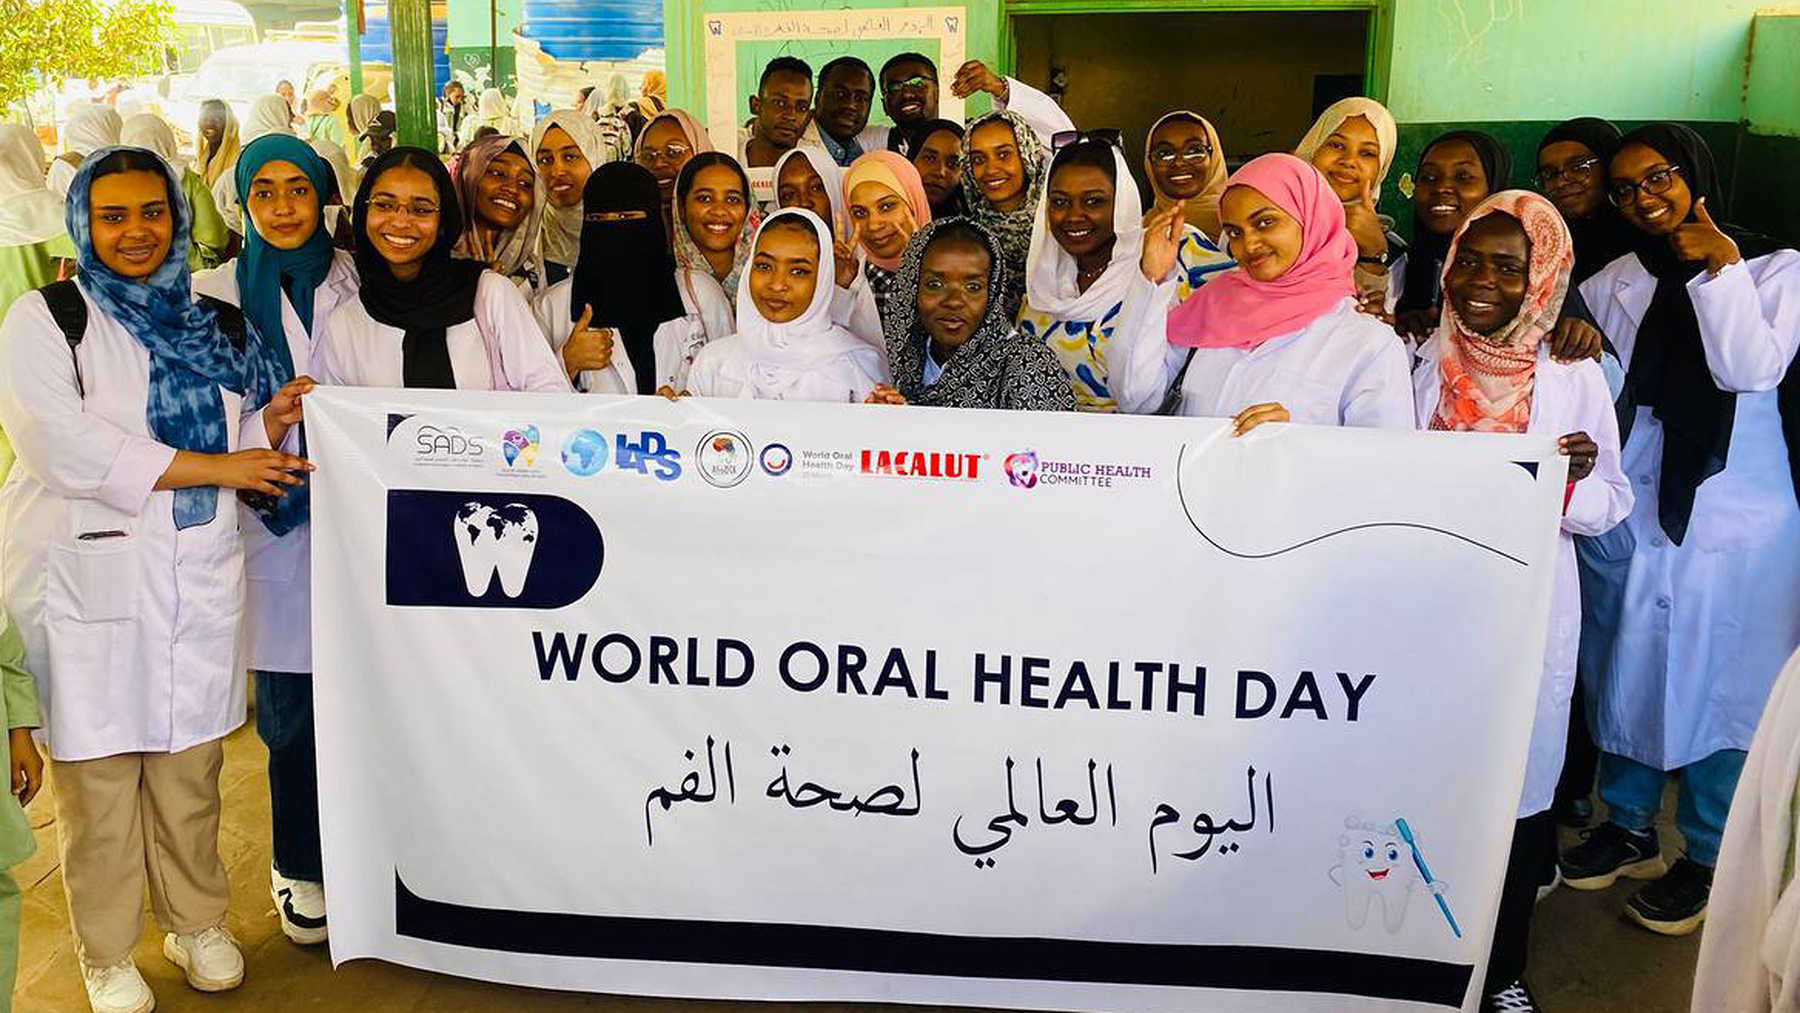 The Sudanese Association of Dental Students, winners of the “Most Original Activity” award, planned and executed a wide range of activities to create increased awareness about dental health across Sudan in honor of WOHD | Image Credit: © Dentsply Sirona